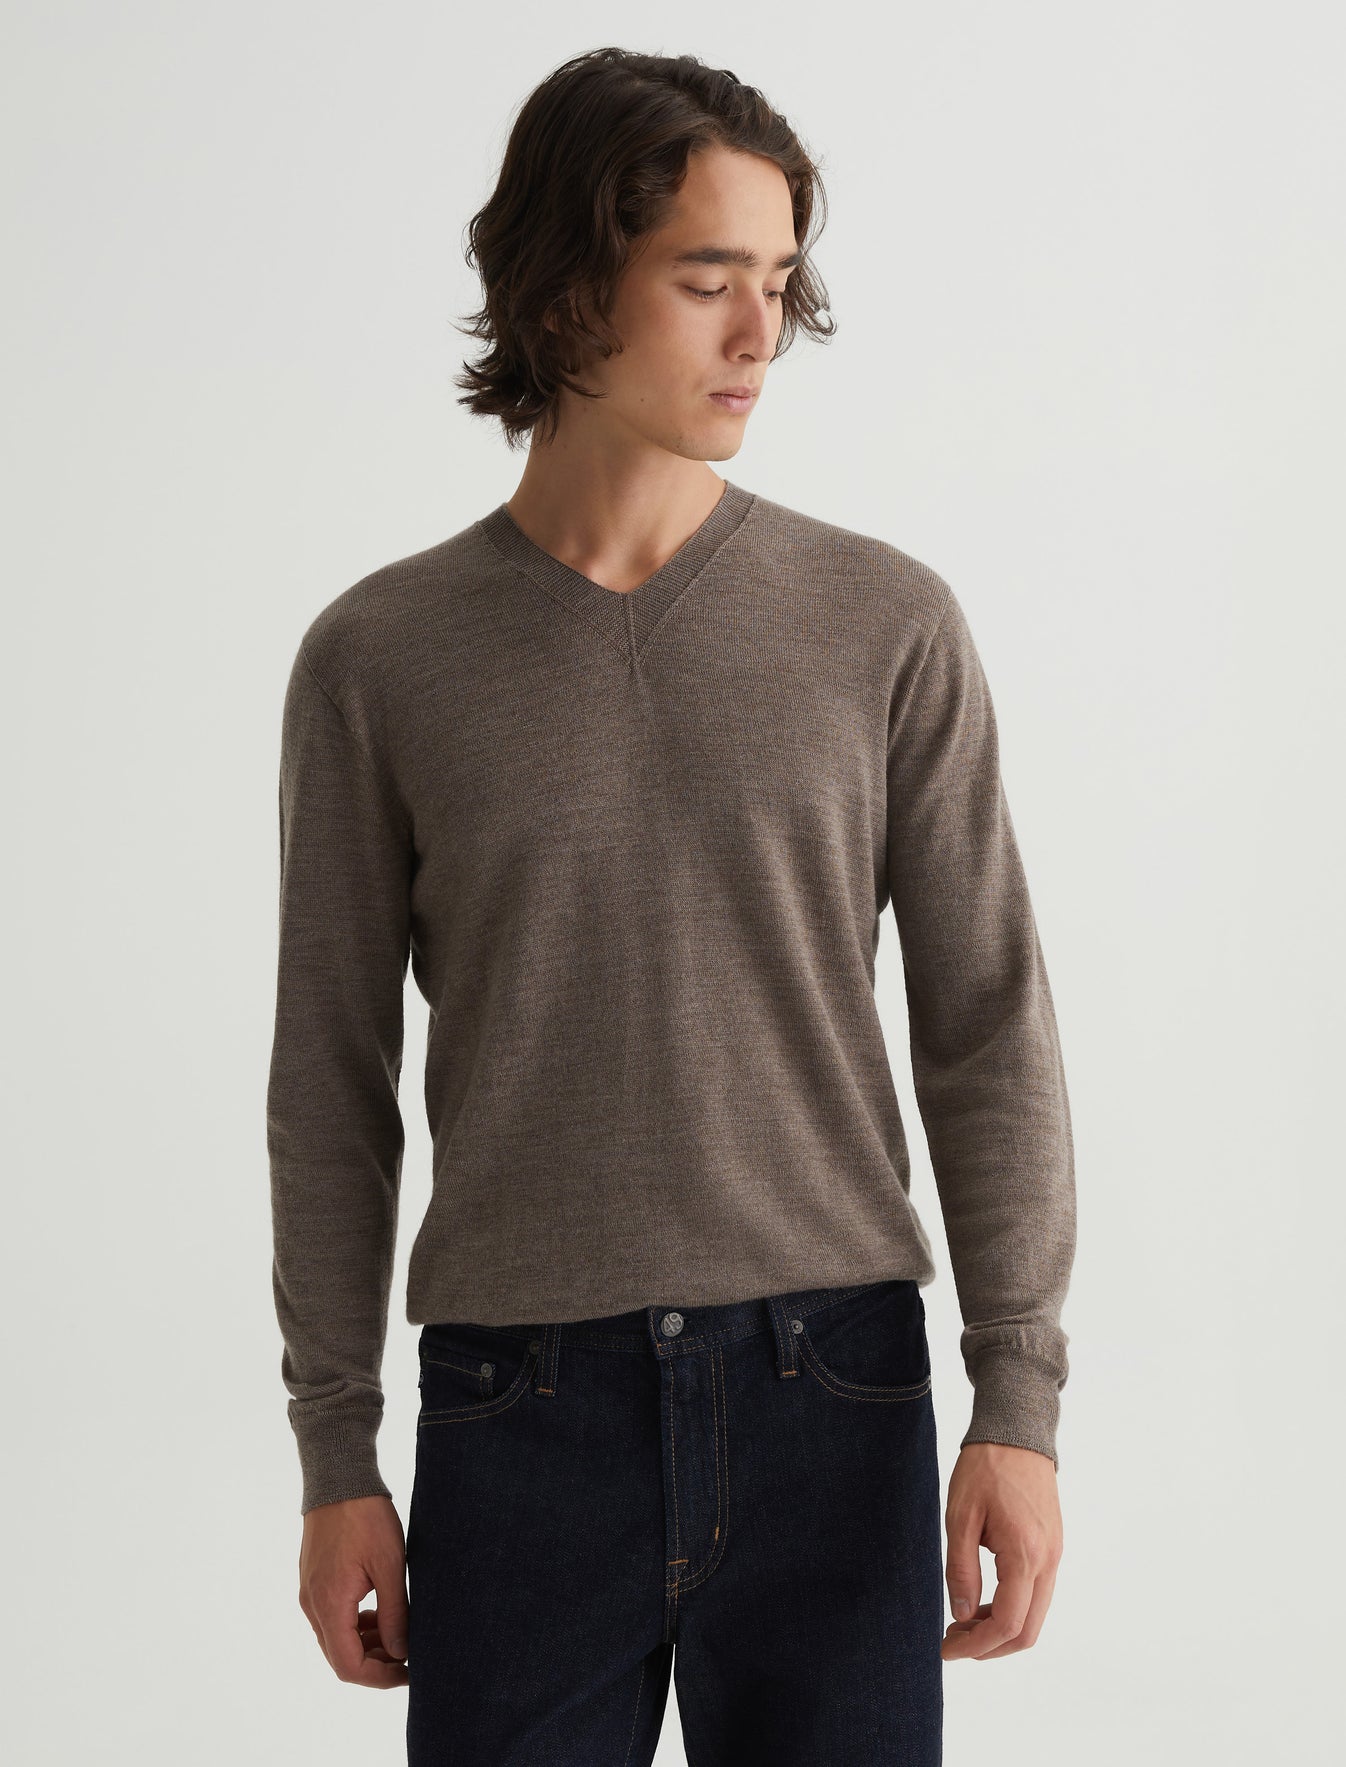 Beck Vee Melange Taupe Classic Fit Long Sleeve Vee Neck Sweater Mens Top Photo 4